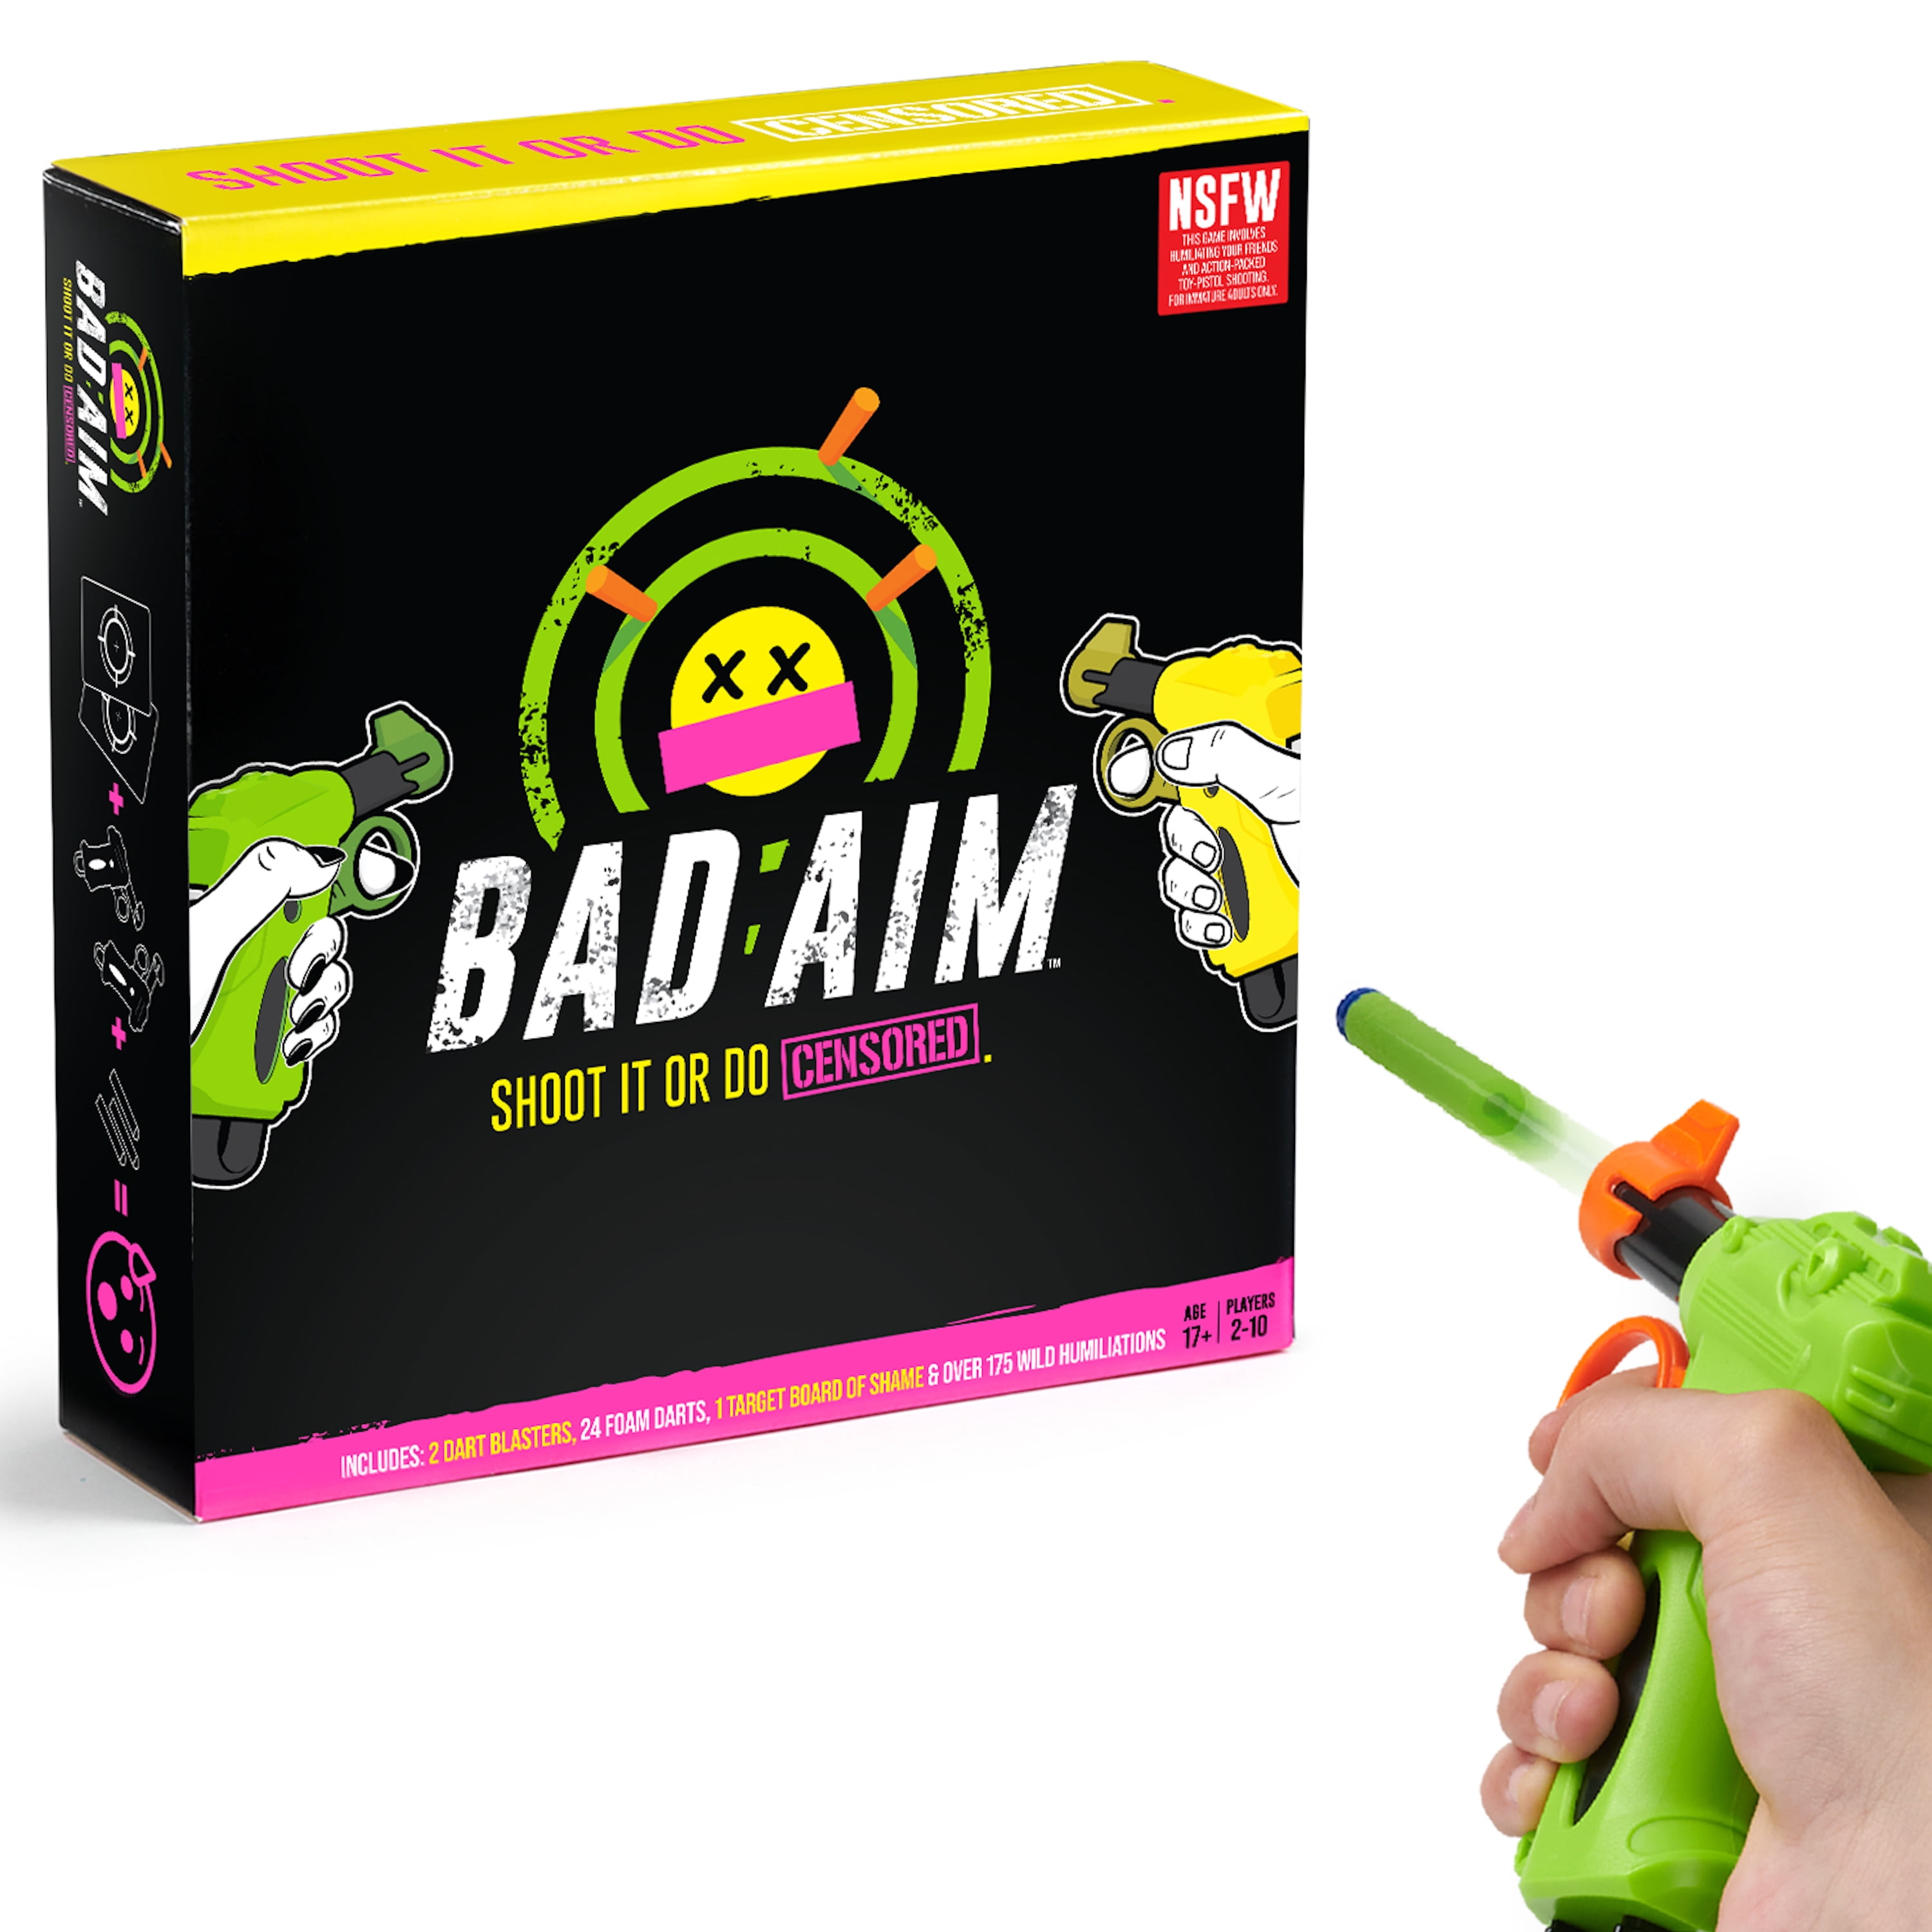 Bad aim - Party Game - Shoot Cards to avoid Doing Wild Truths and Dares (Nsfw Version)